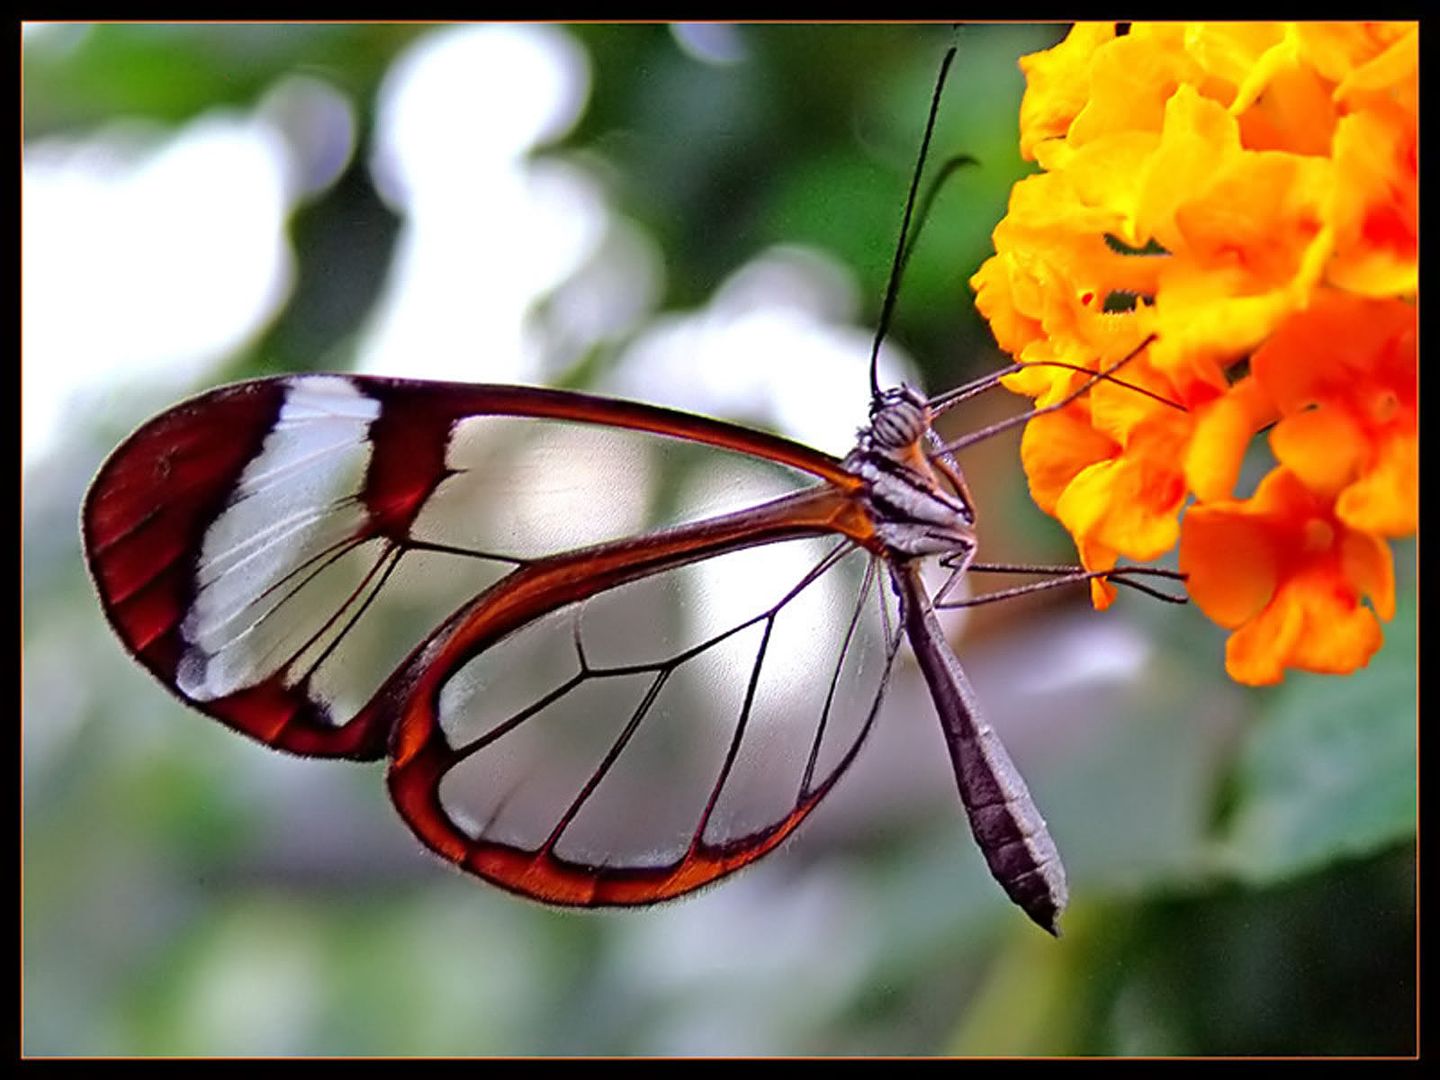 transparent-butterfly2a.jpg Transparent butterfly2 image by photowebs